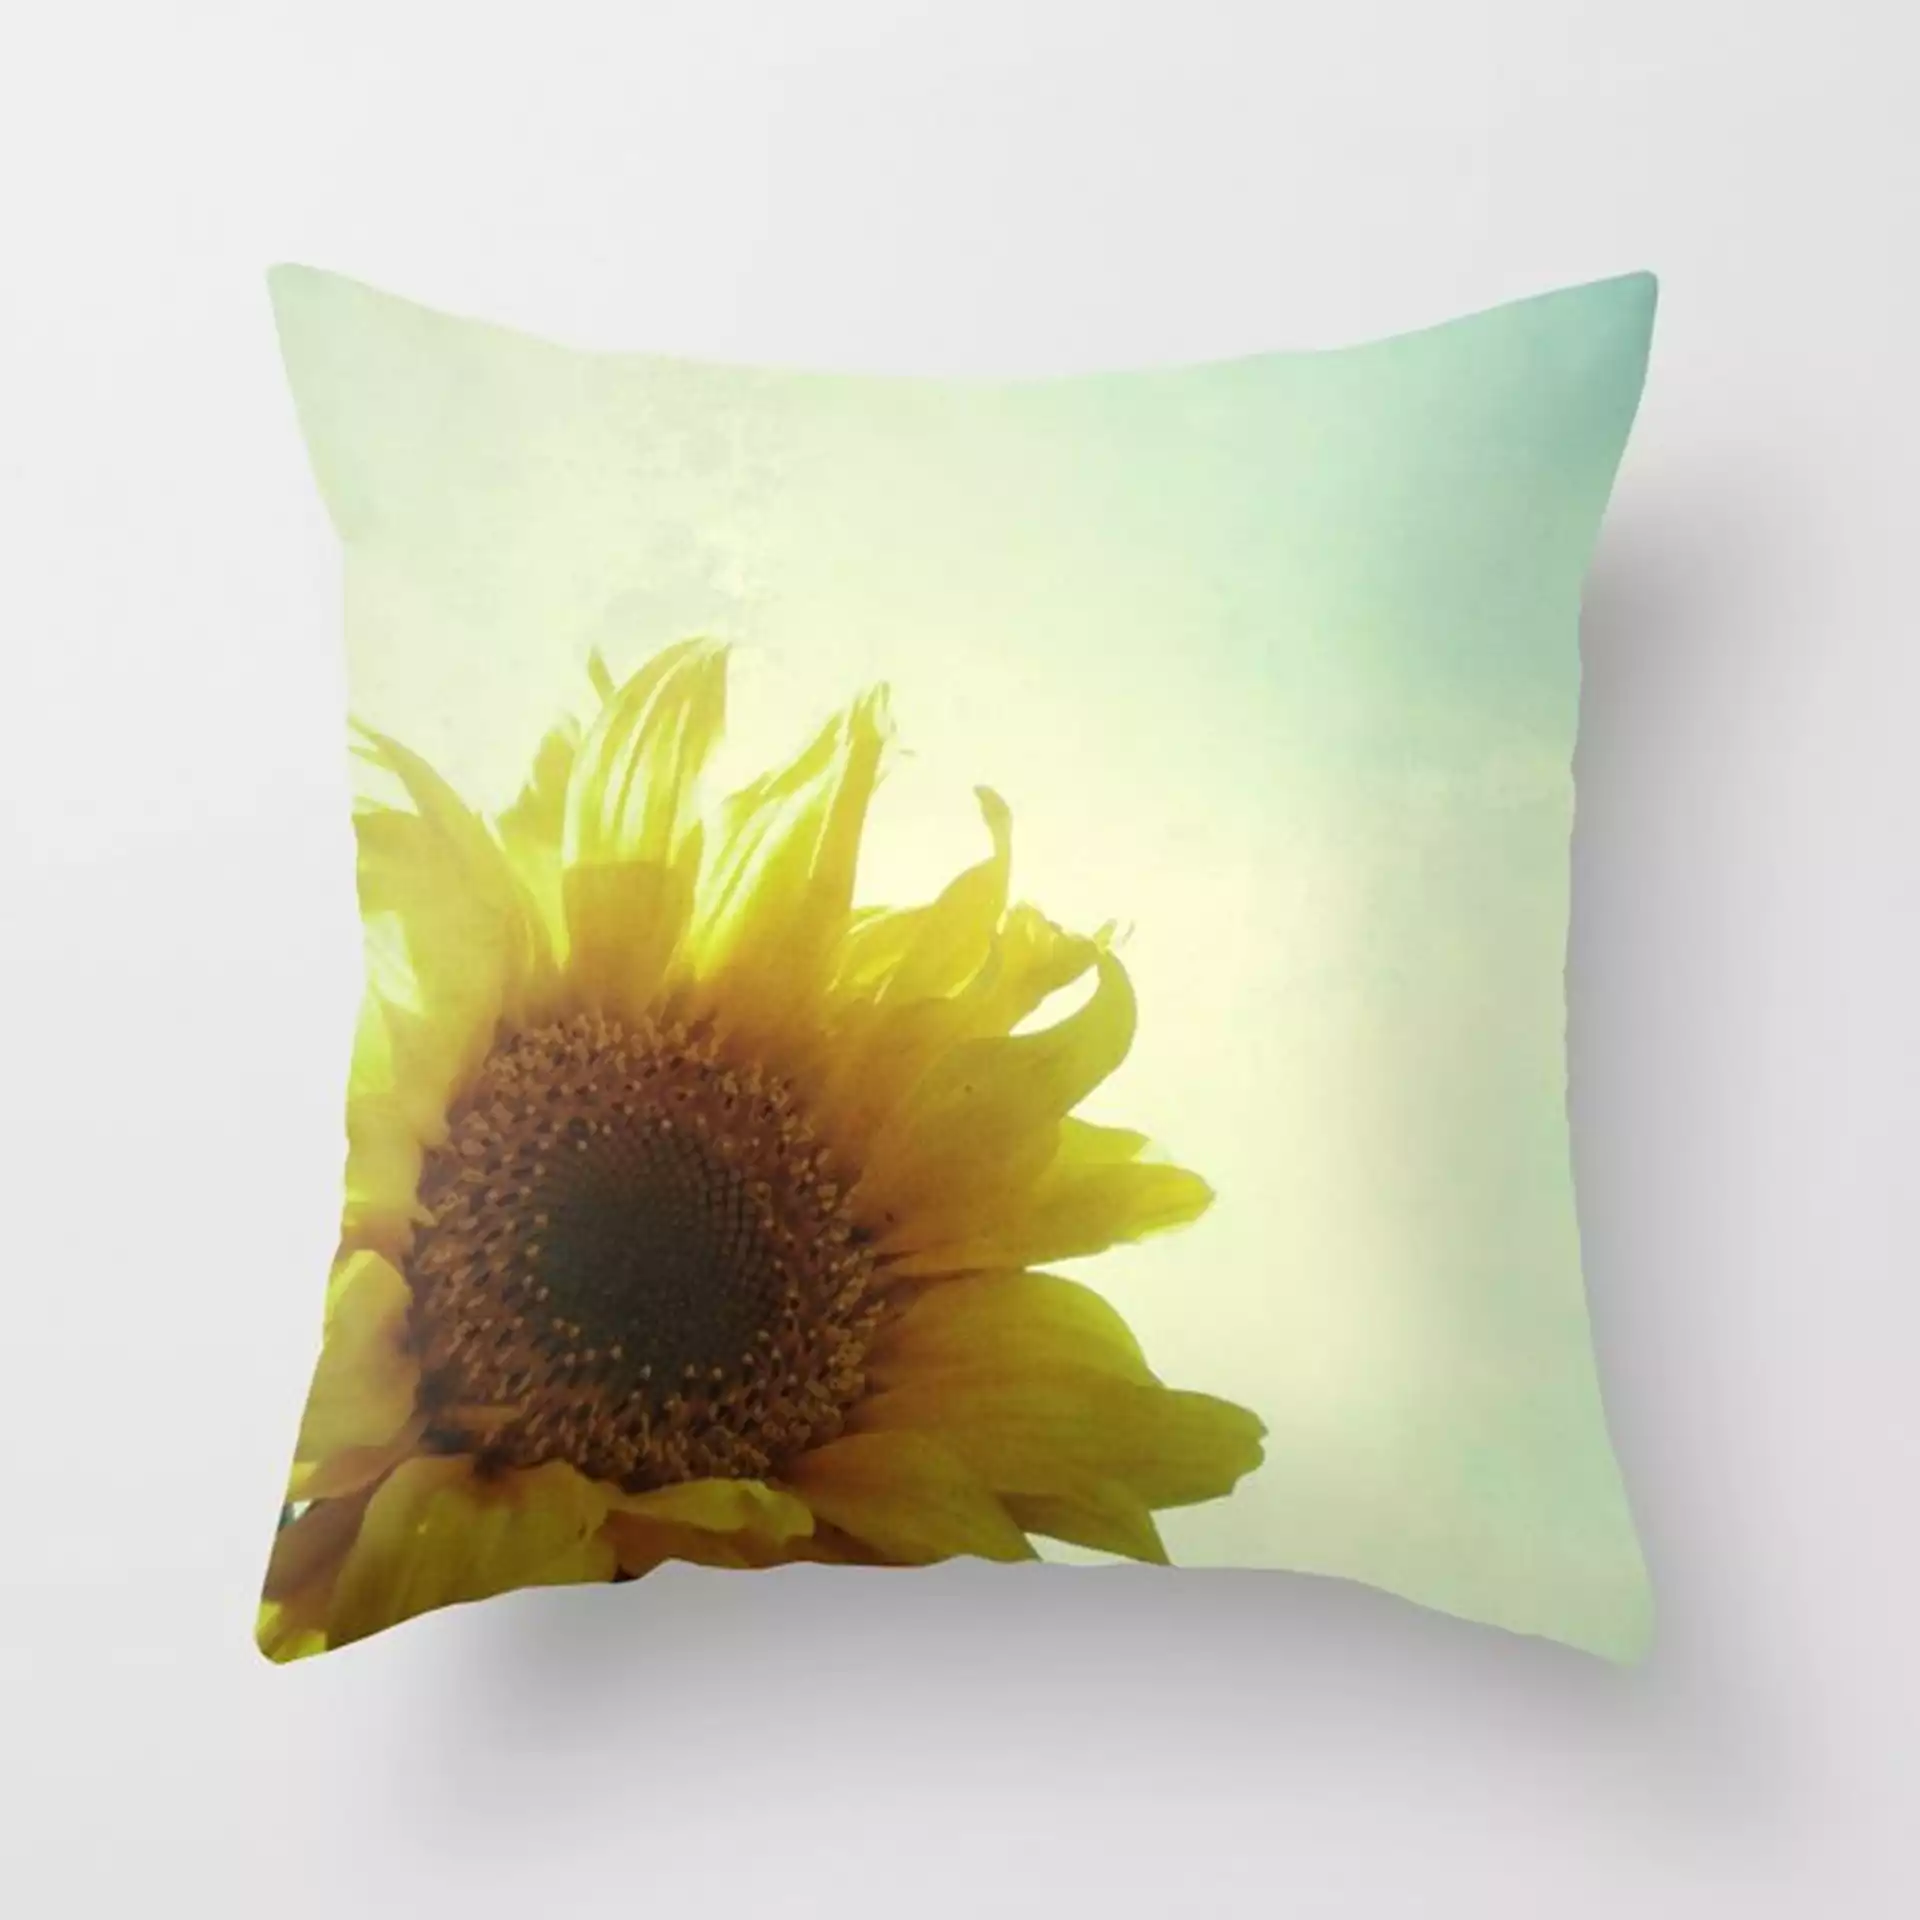 Sunflower Couch Throw Pillow by Cassia Beck - Cover (20" x 20") with pillow insert - Indoor Pillow